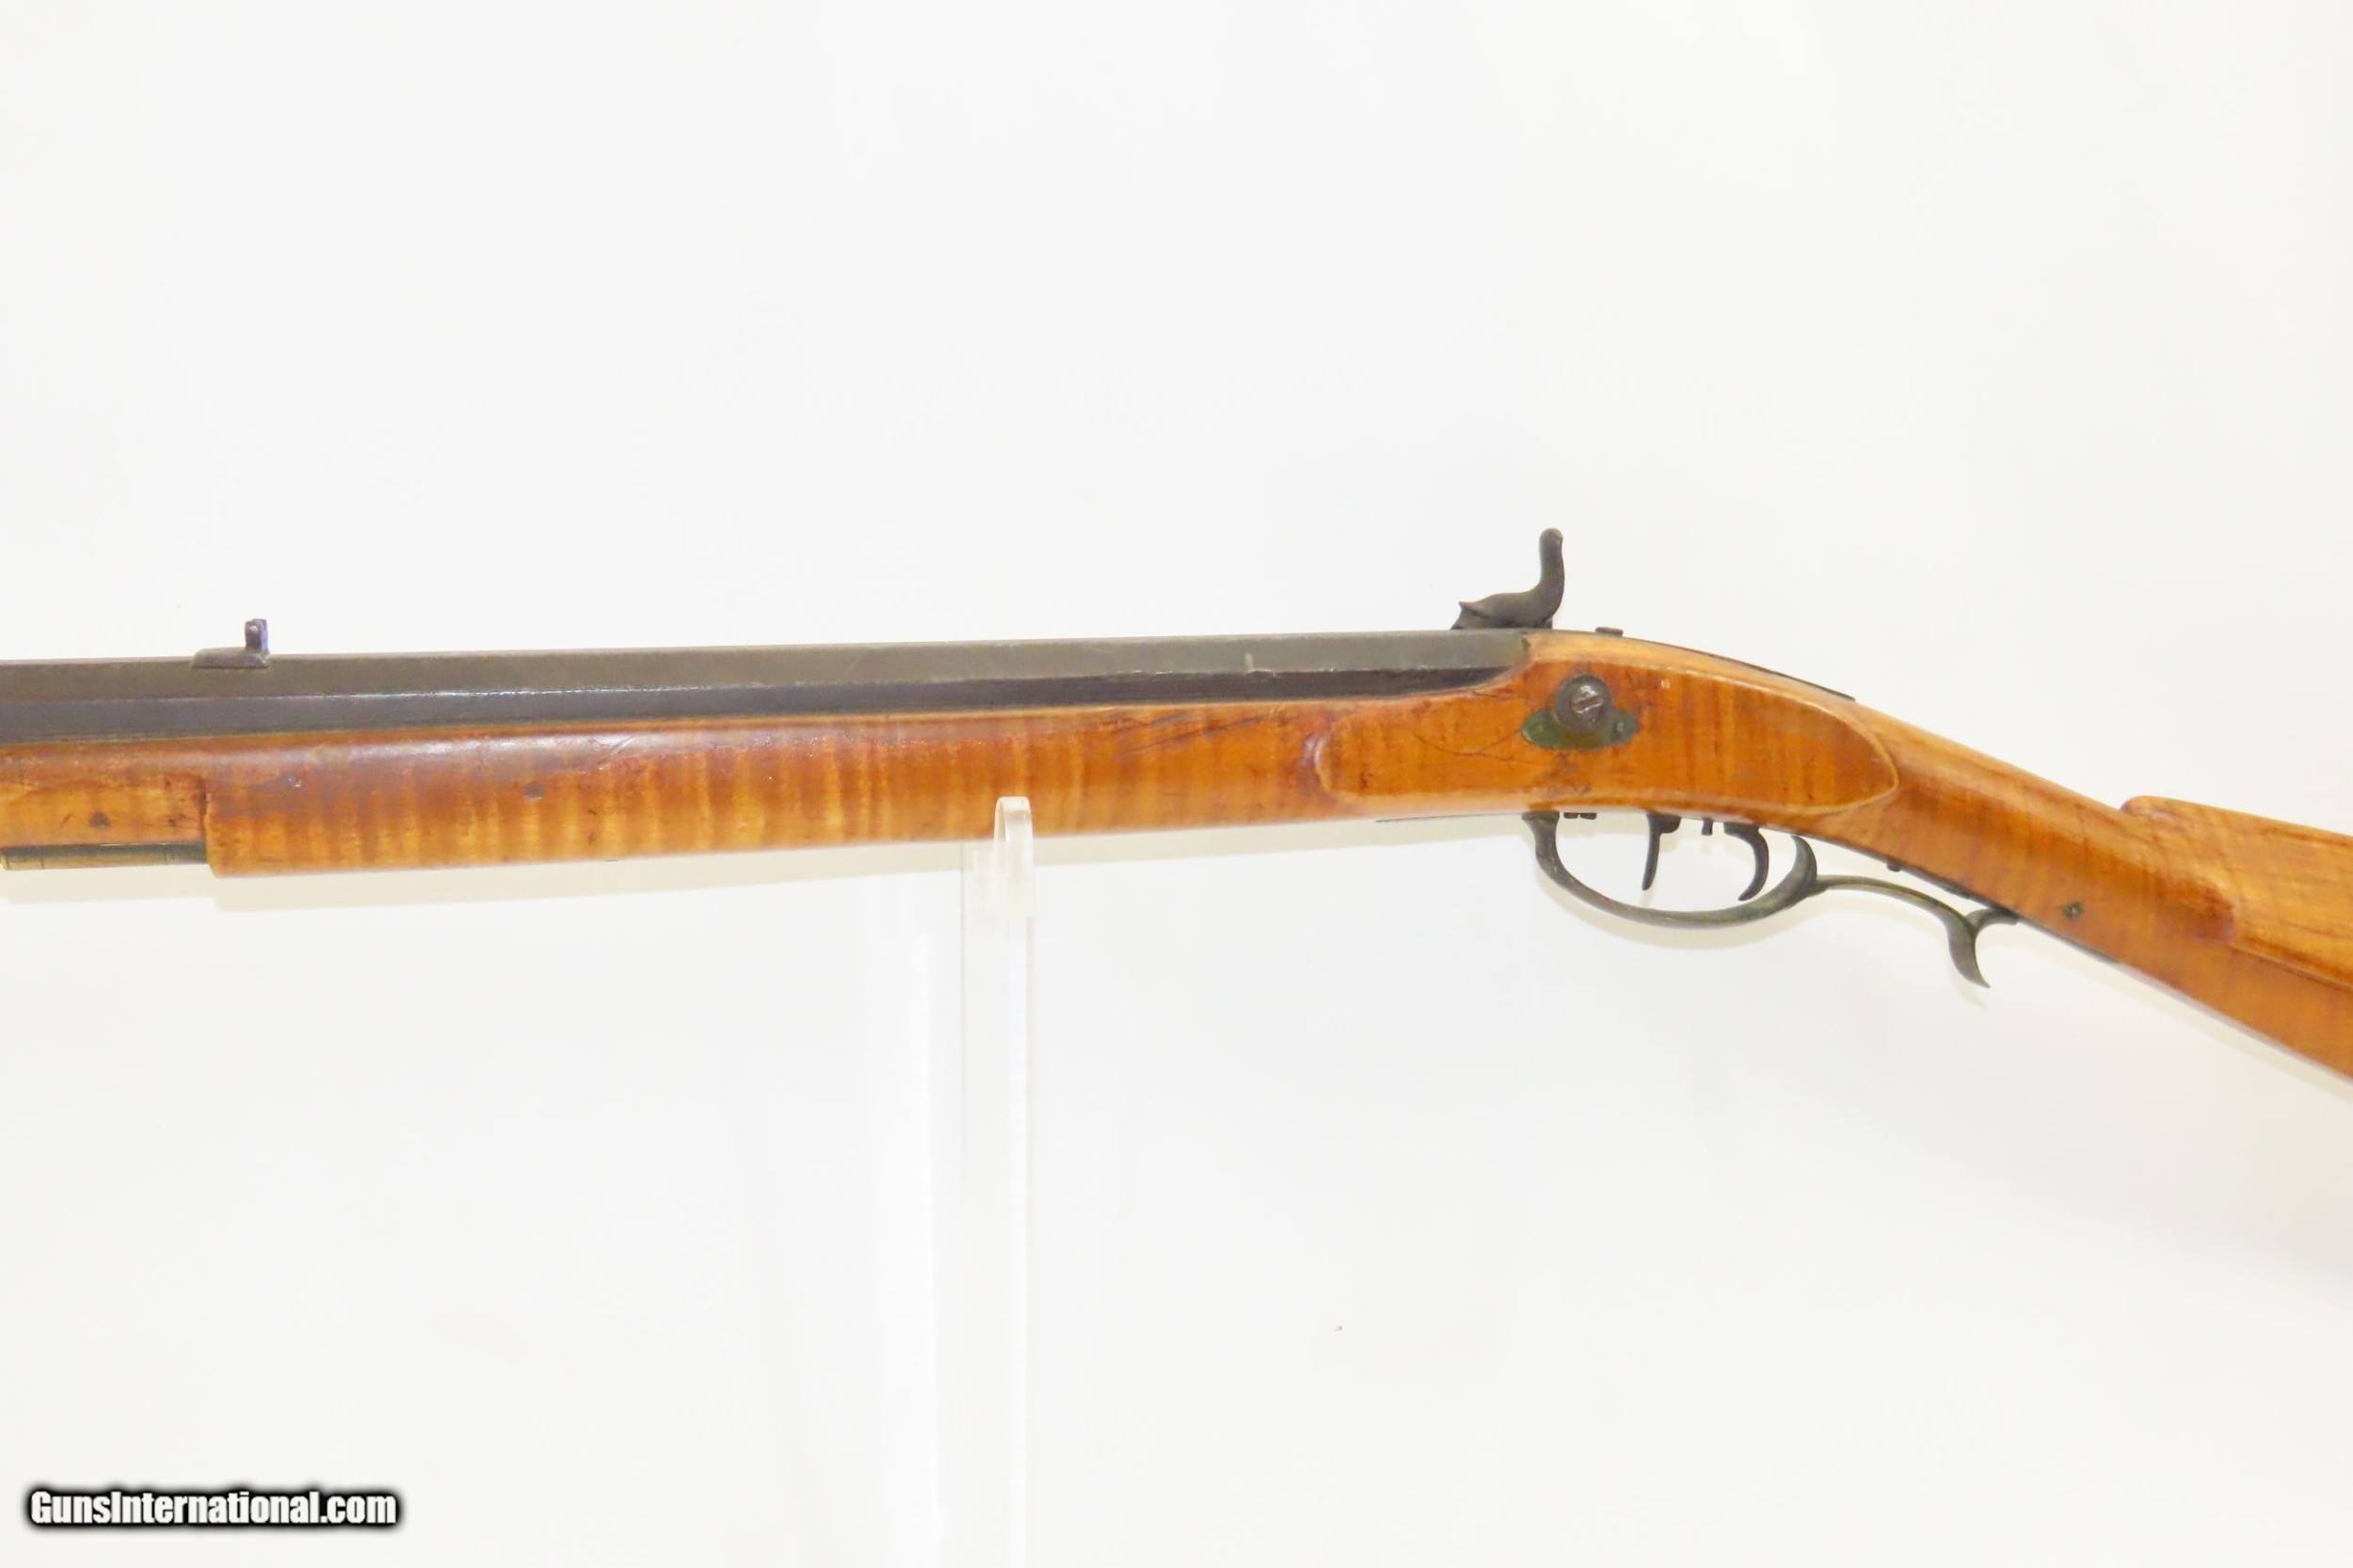 Kentucky carbine, USA 19th. C. - Rifles & carbines - Western and